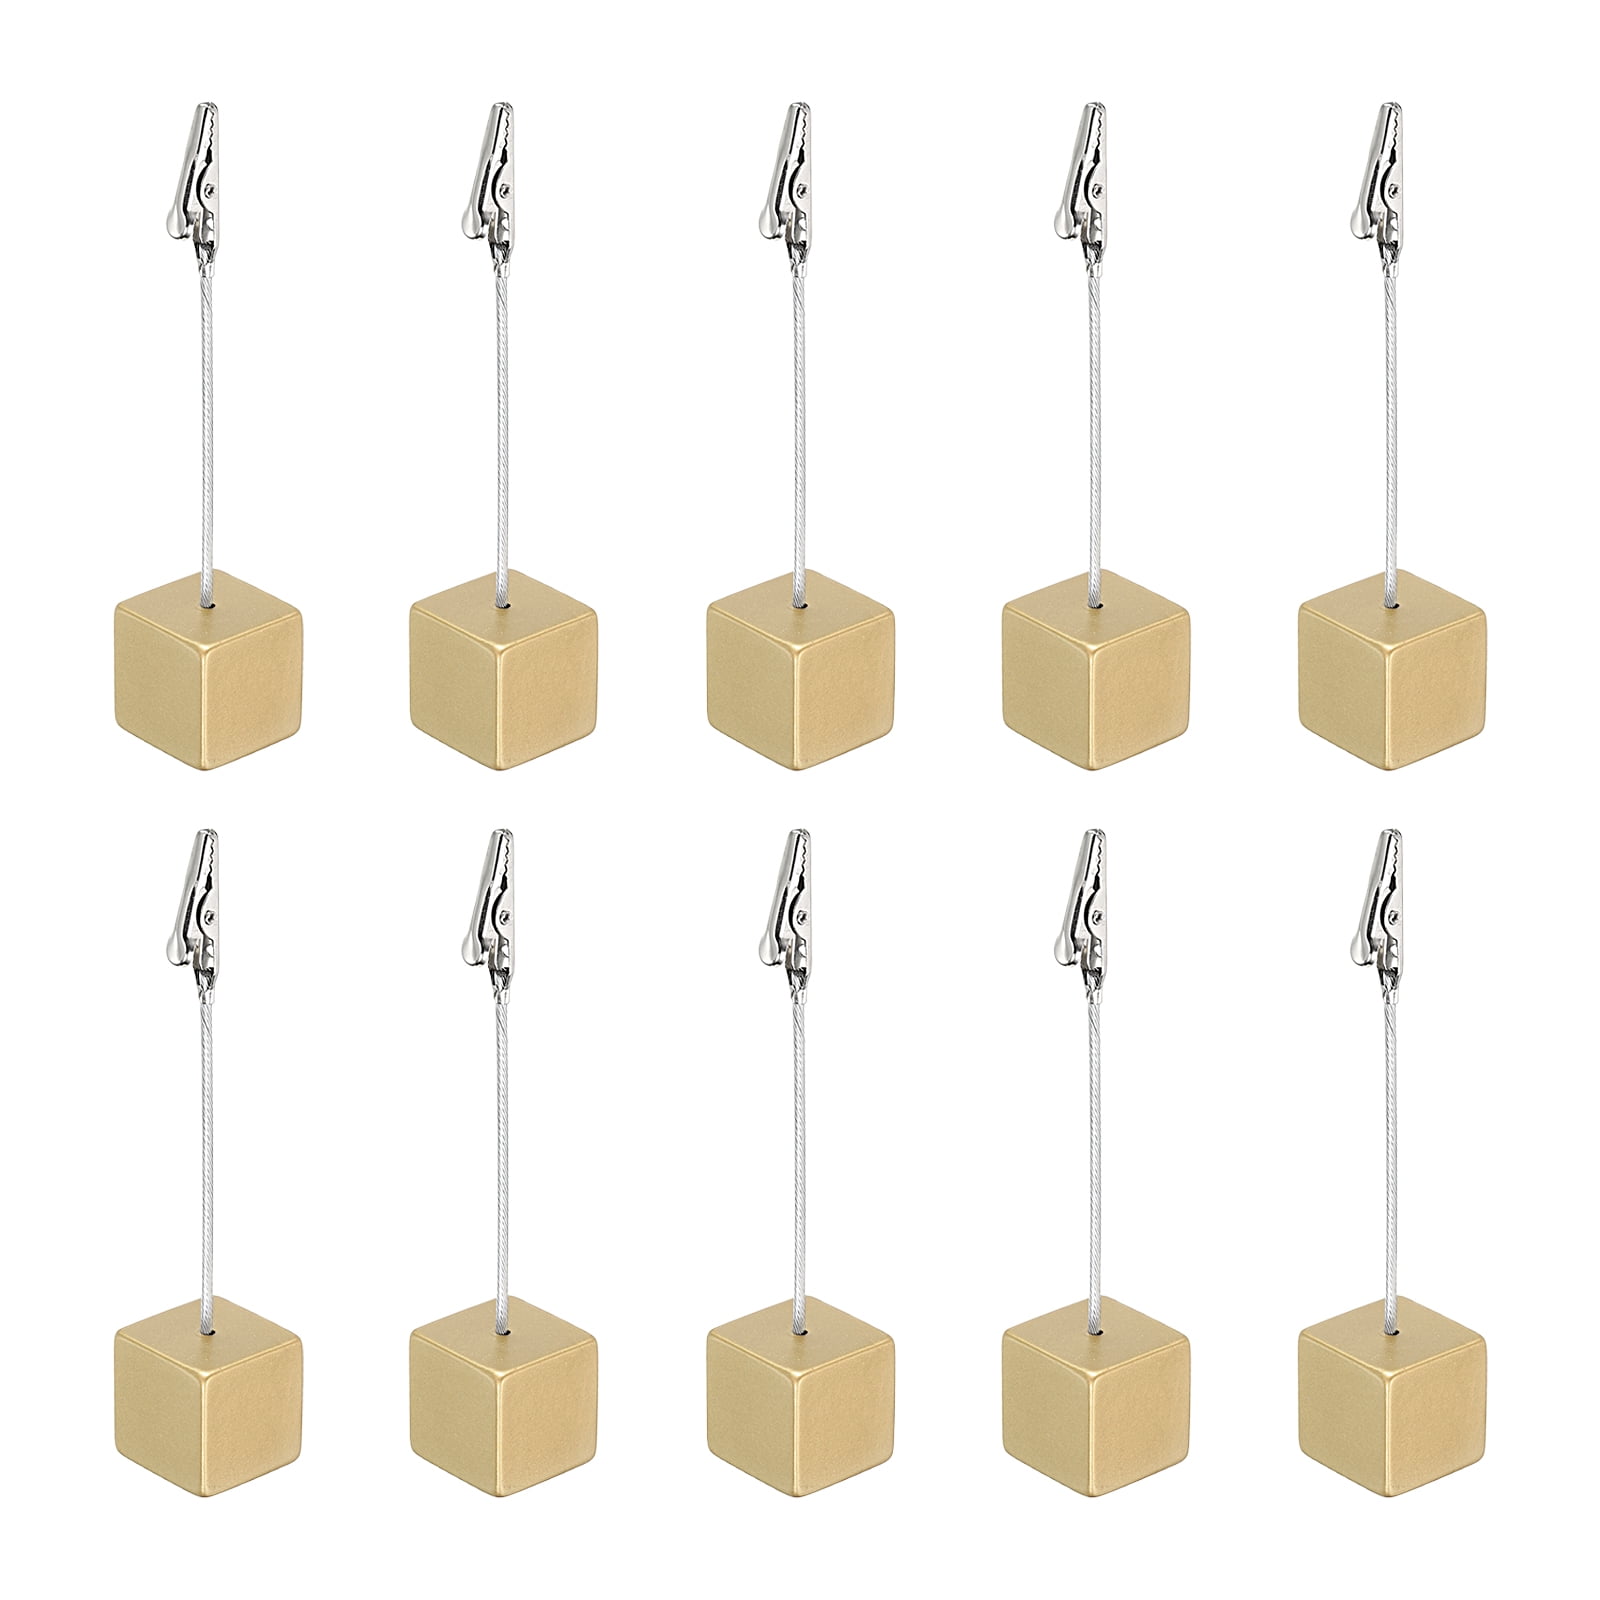 FixtureDisplays Set of 50 5 Place Card Holders with Alligator Clip and Wooden Cube Base 119964 